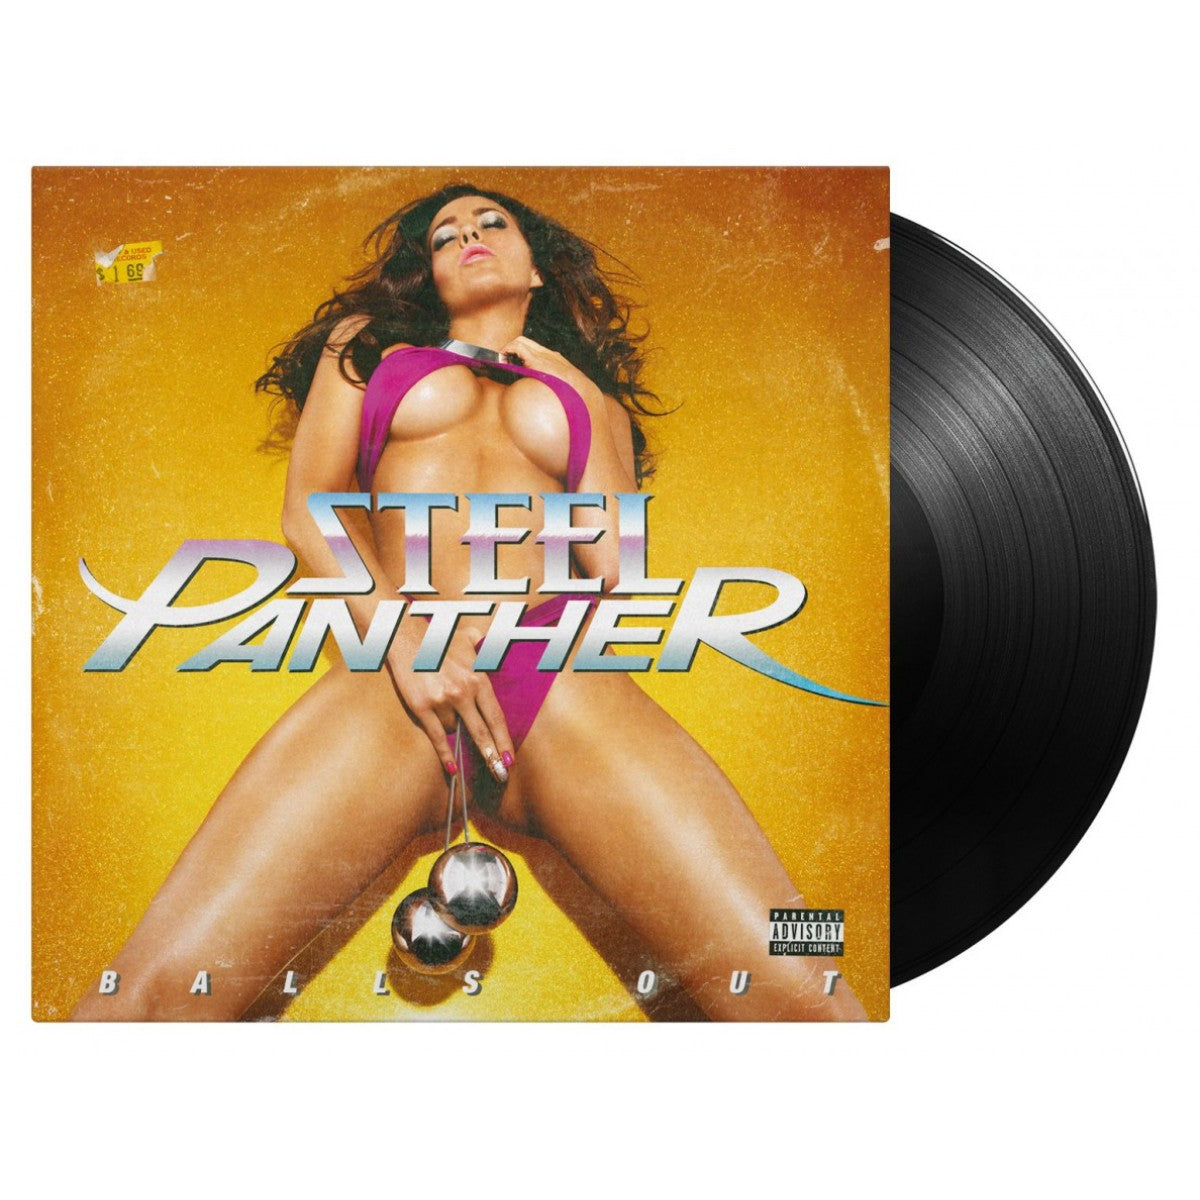 Steel Panther "Balls Out" Vinyl